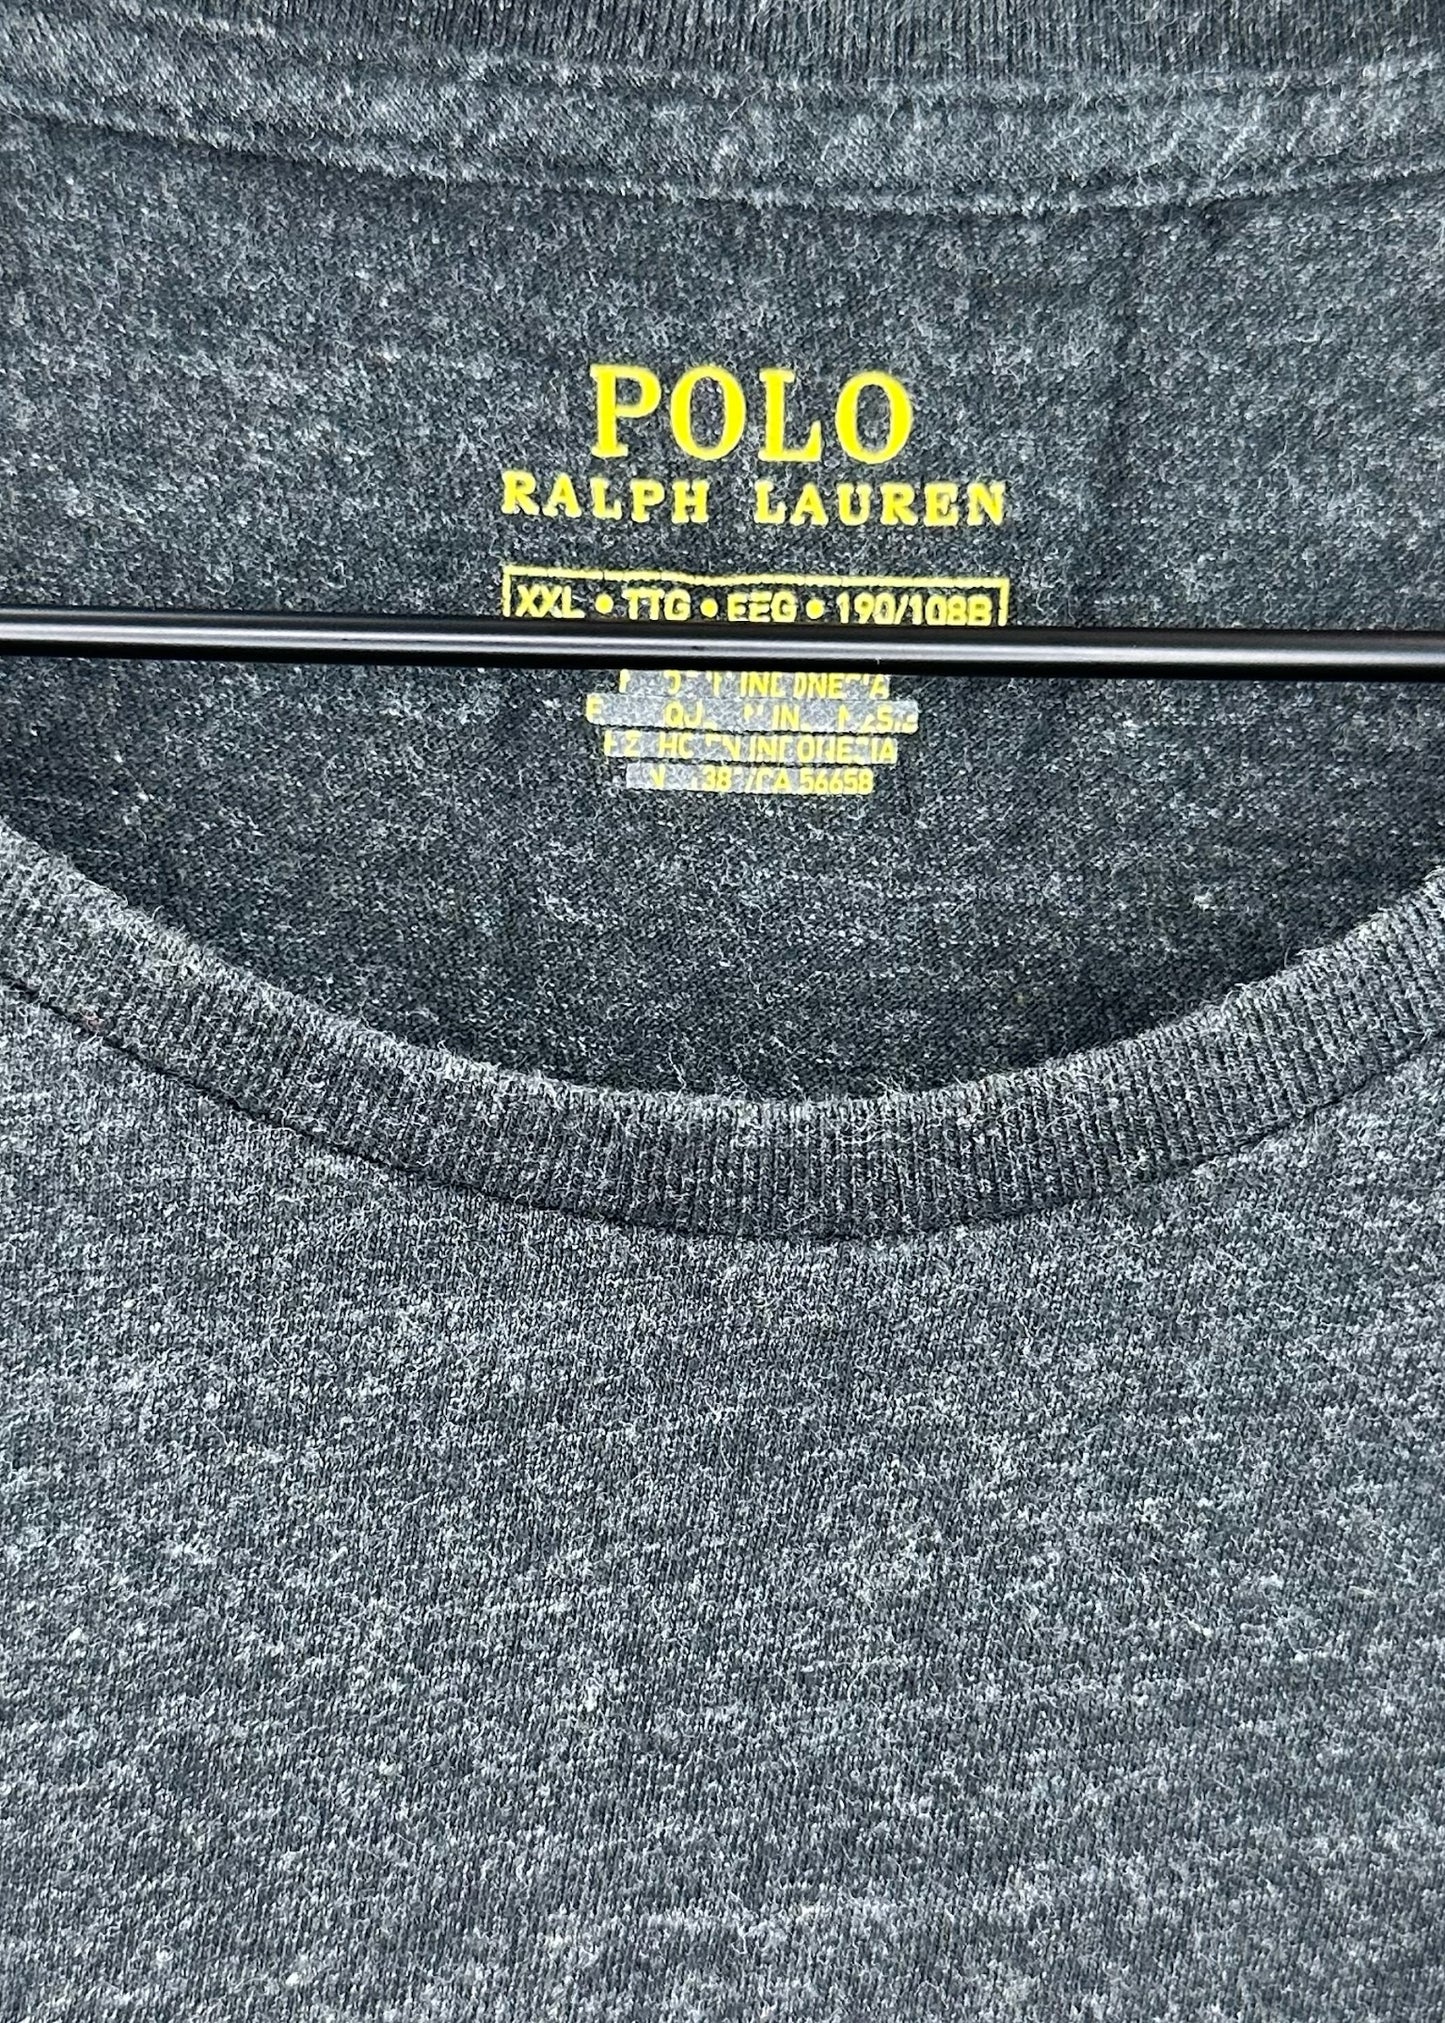 Charcoal Grey T-Shirt By Polo